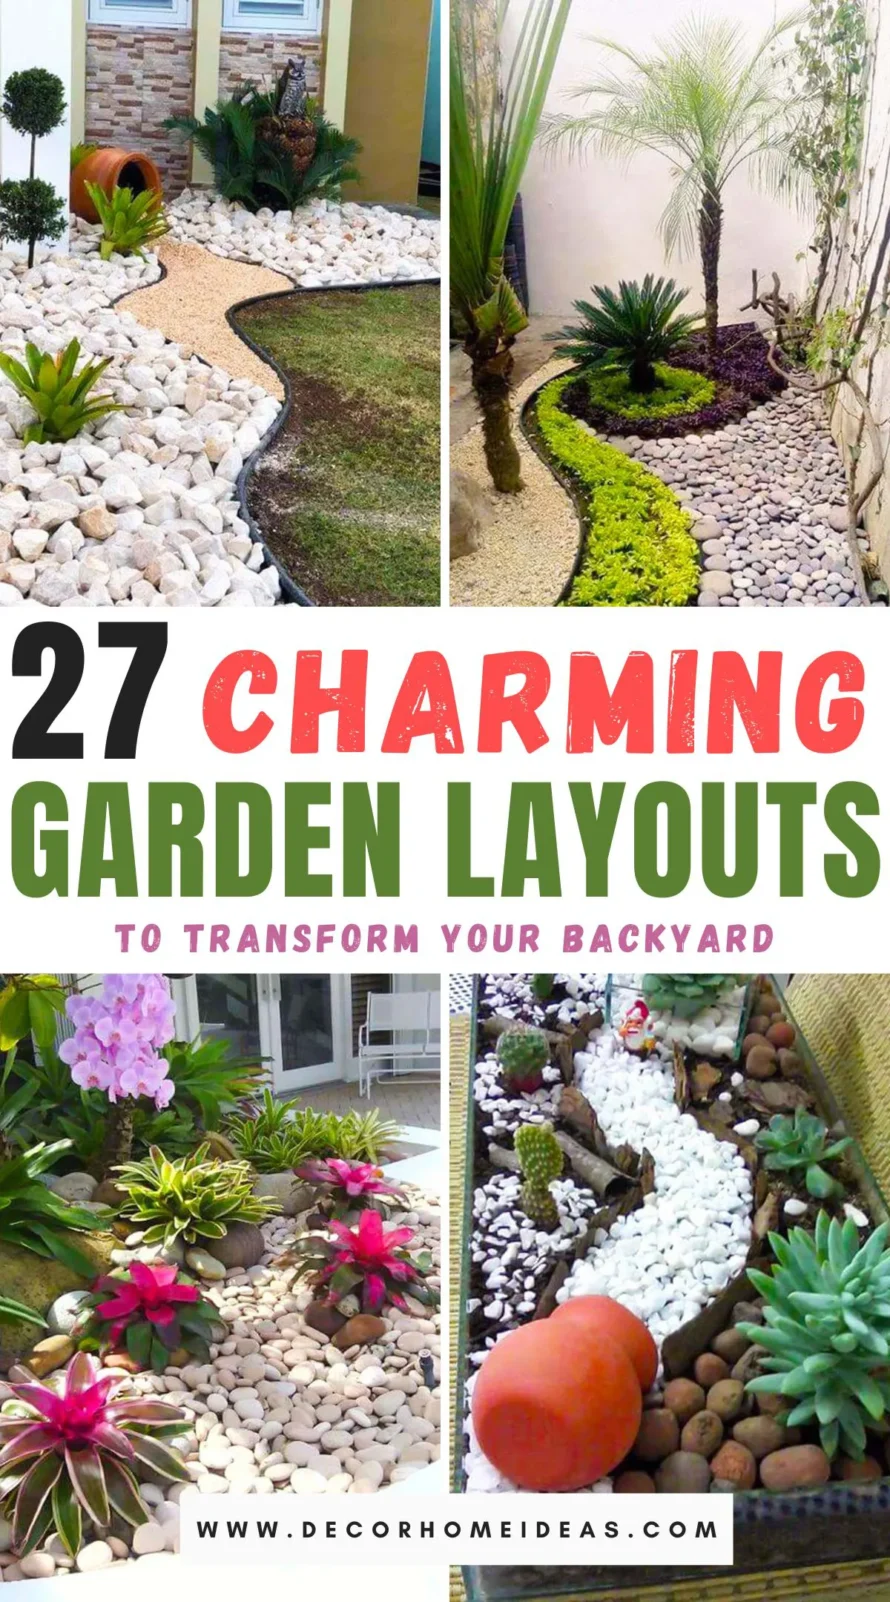 Unveil 27 captivating garden ideas designed to enchant your outdoor space. From magical floral arrangements to innovative landscaping techniques, each concept is crafted to transform your garden into a breathtaking retreat. Let these ideas inspire you to create your own mesmerizing outdoor haven!